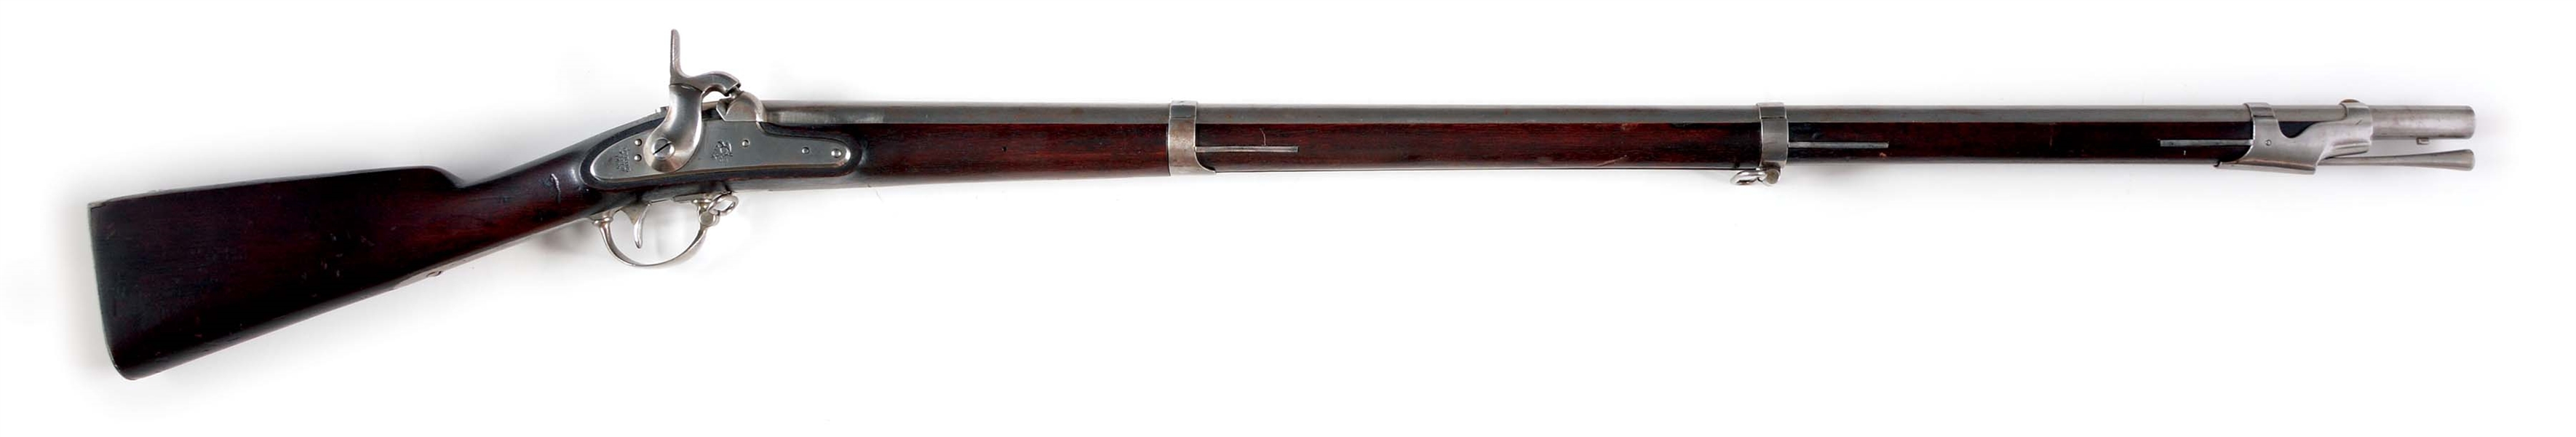 (A) CONFEDERATE CAPTURED AND REPAIRED SPRINGFIELD MODEL 1842 MUSKET, DATED 1855.